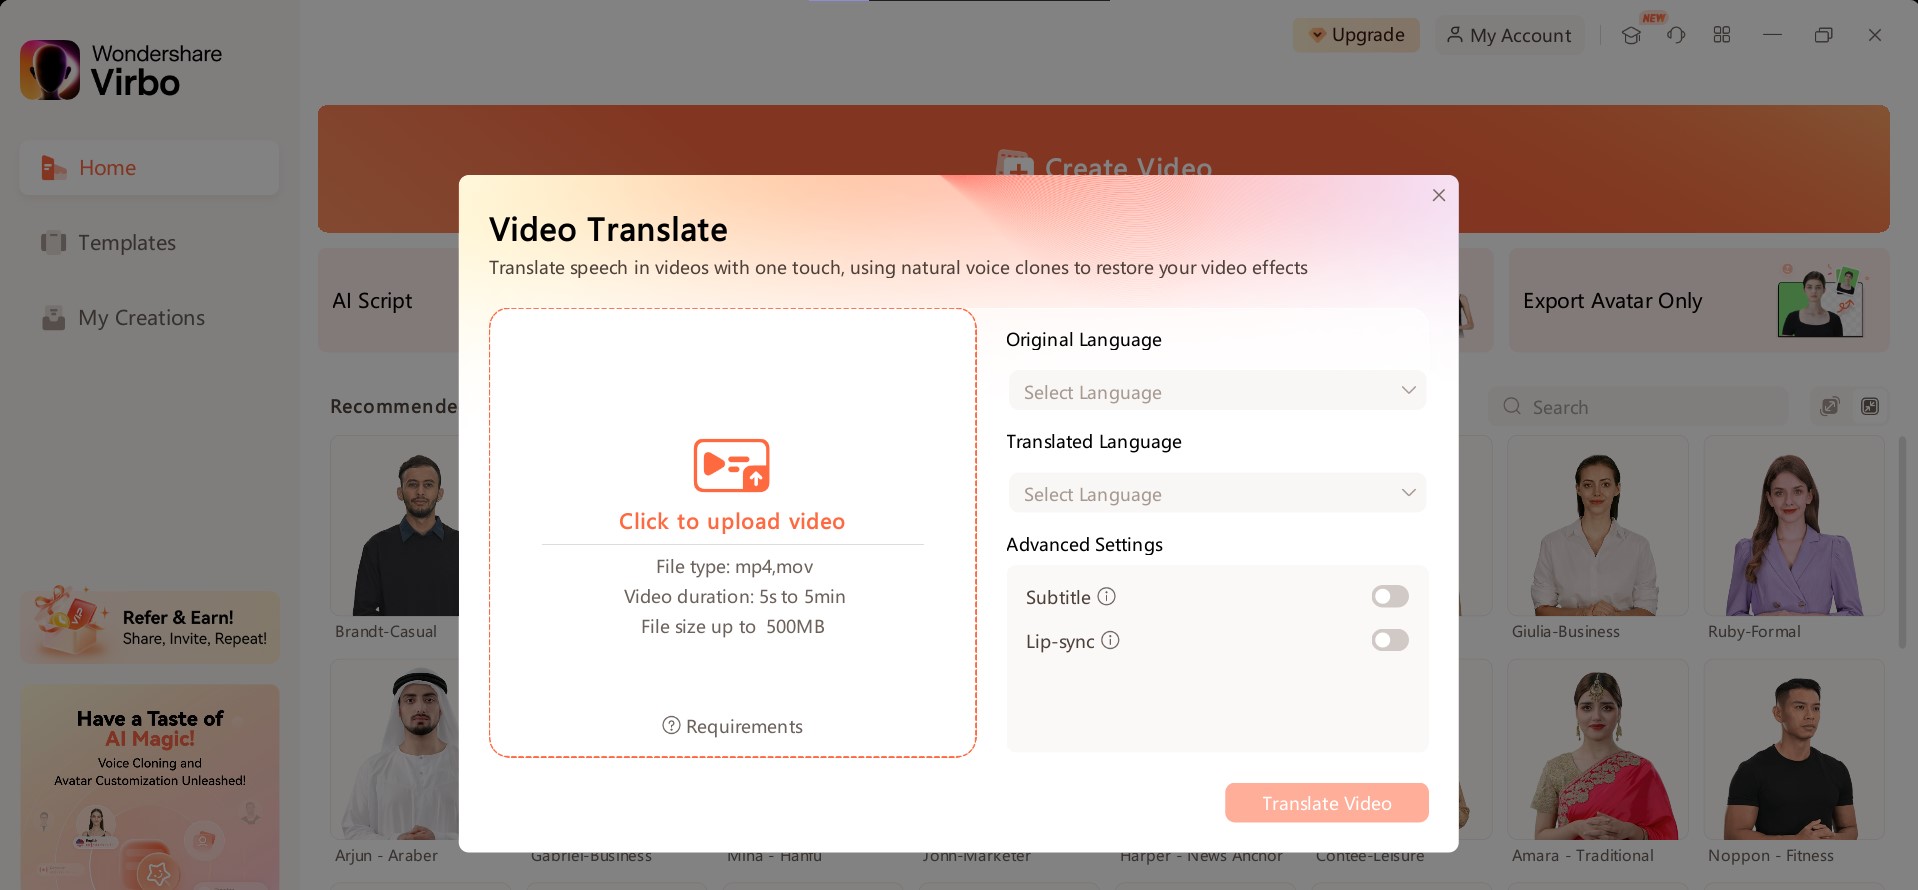 virbo’s video upload page